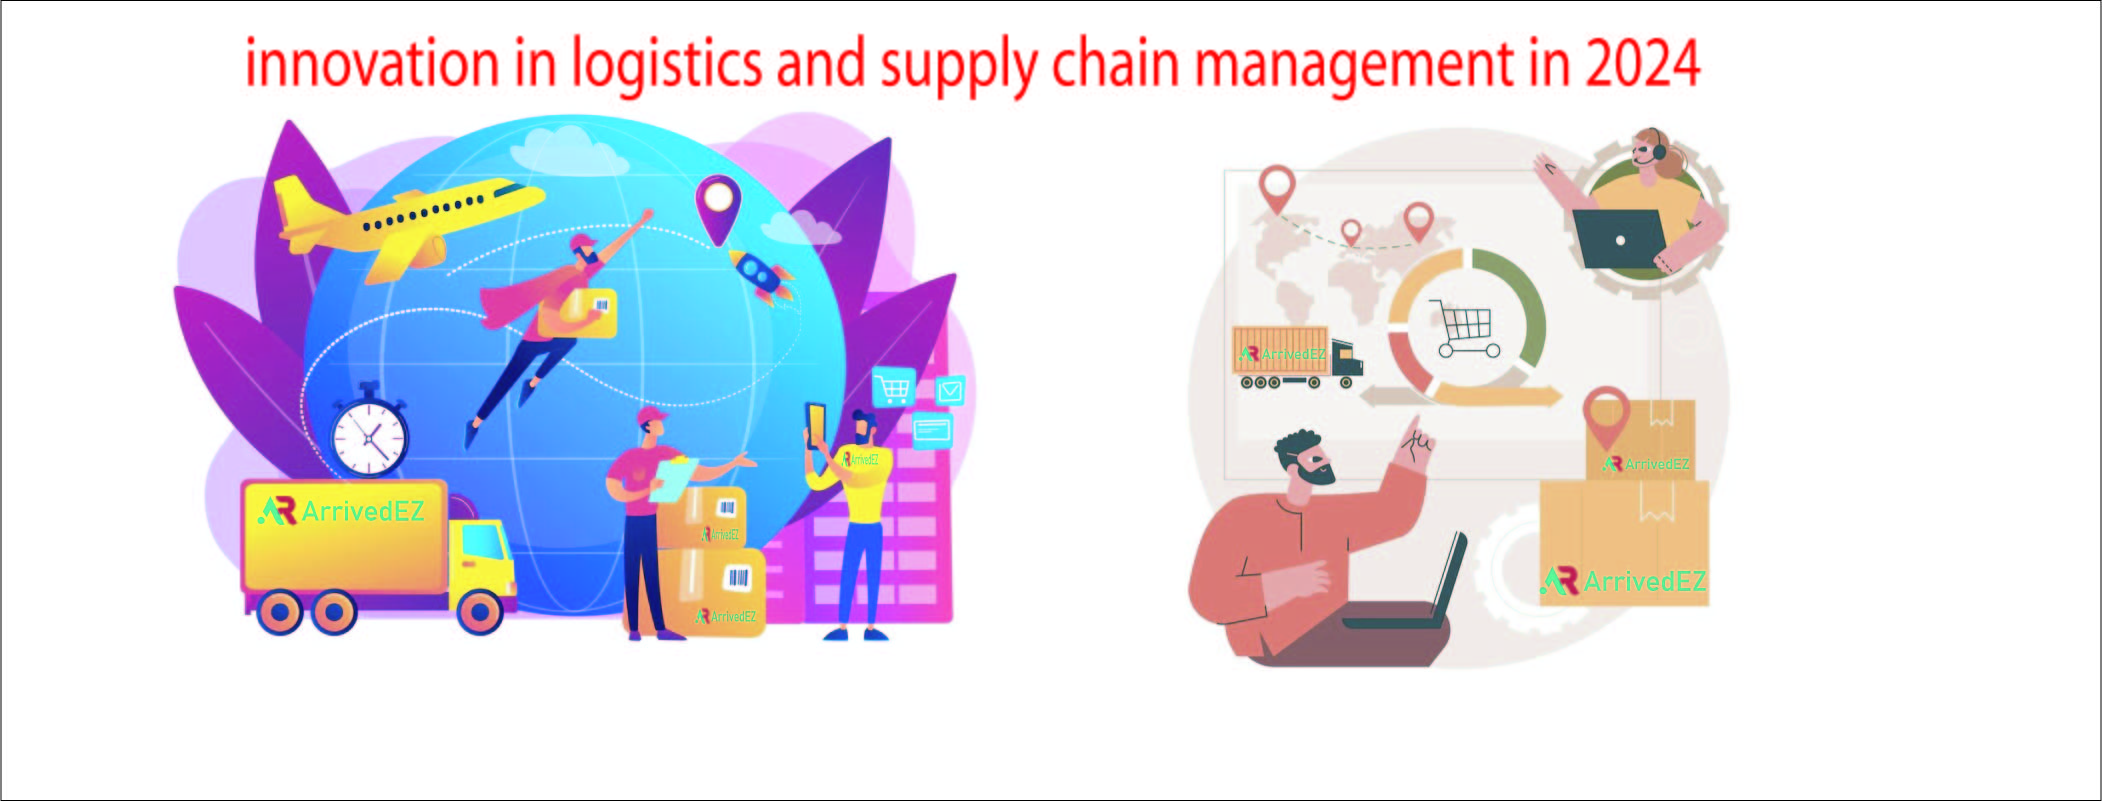 innovation in logistics and supply chain management